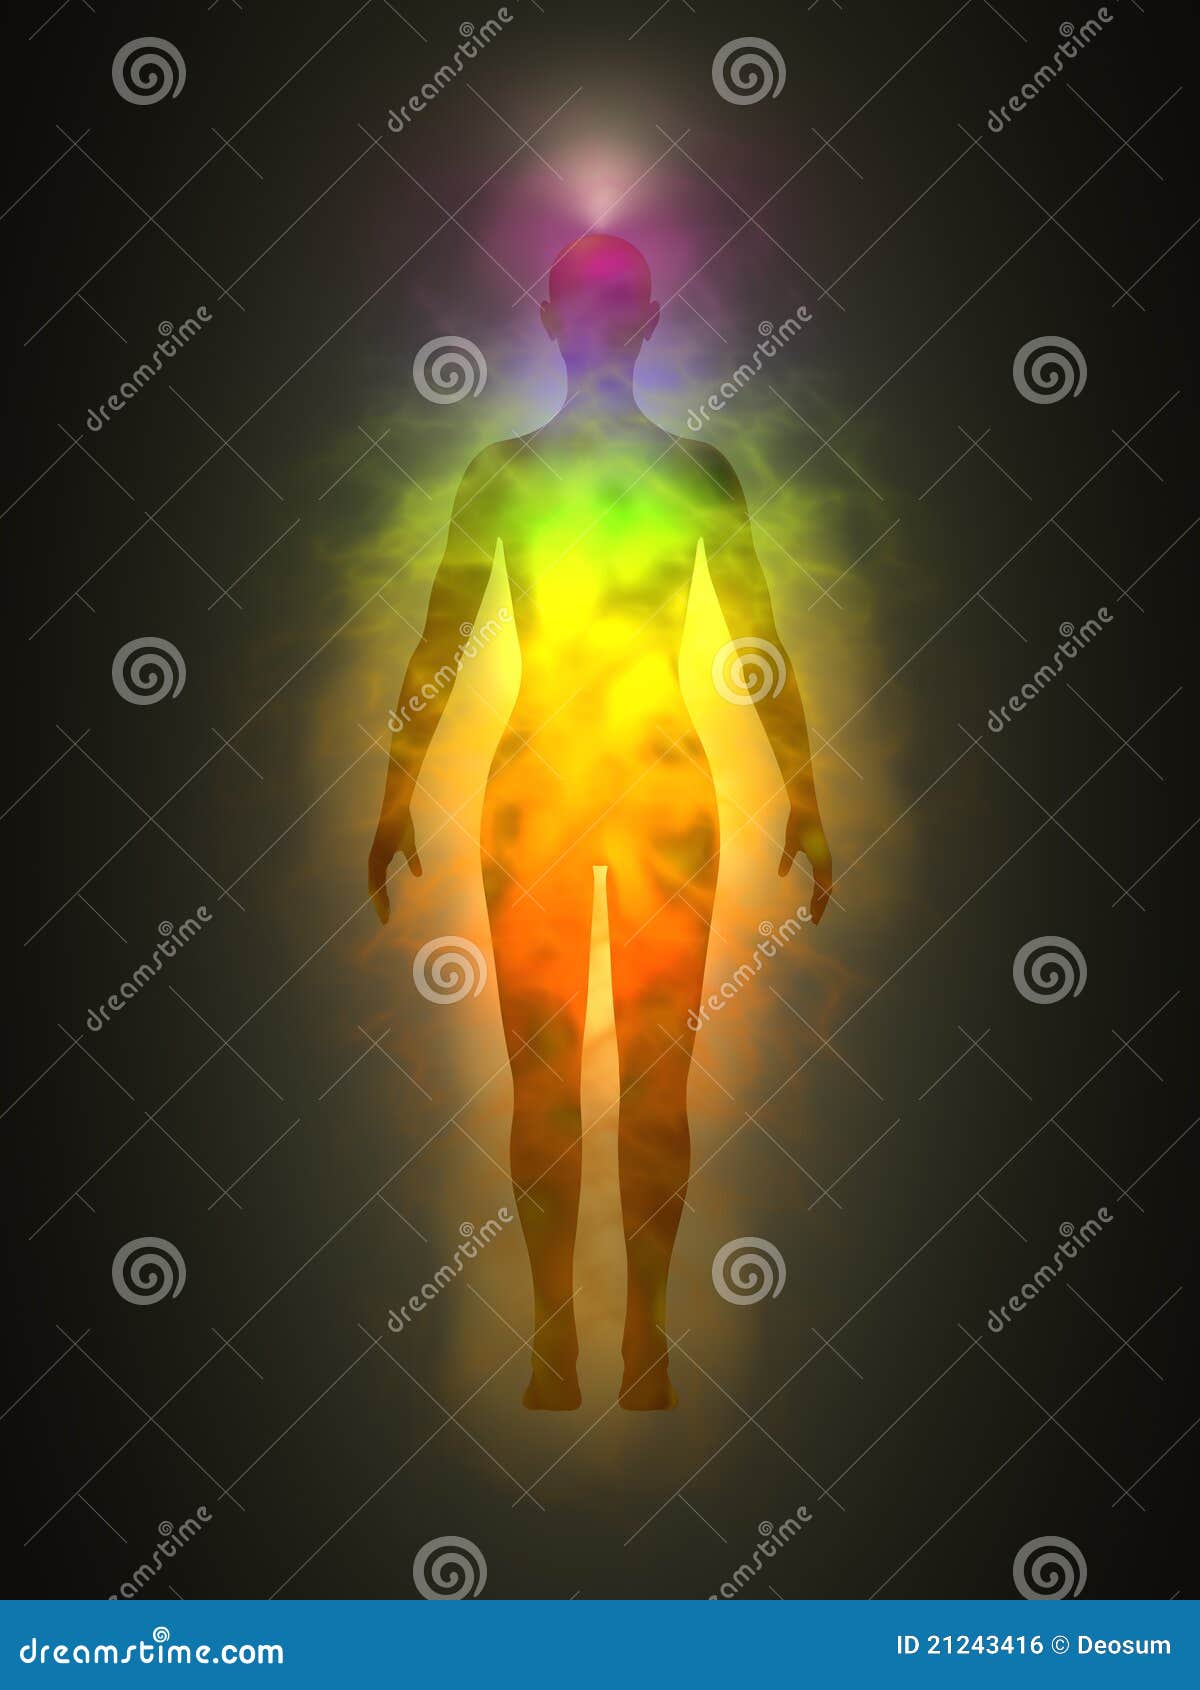 woman silhouette with aura, chakras, energy